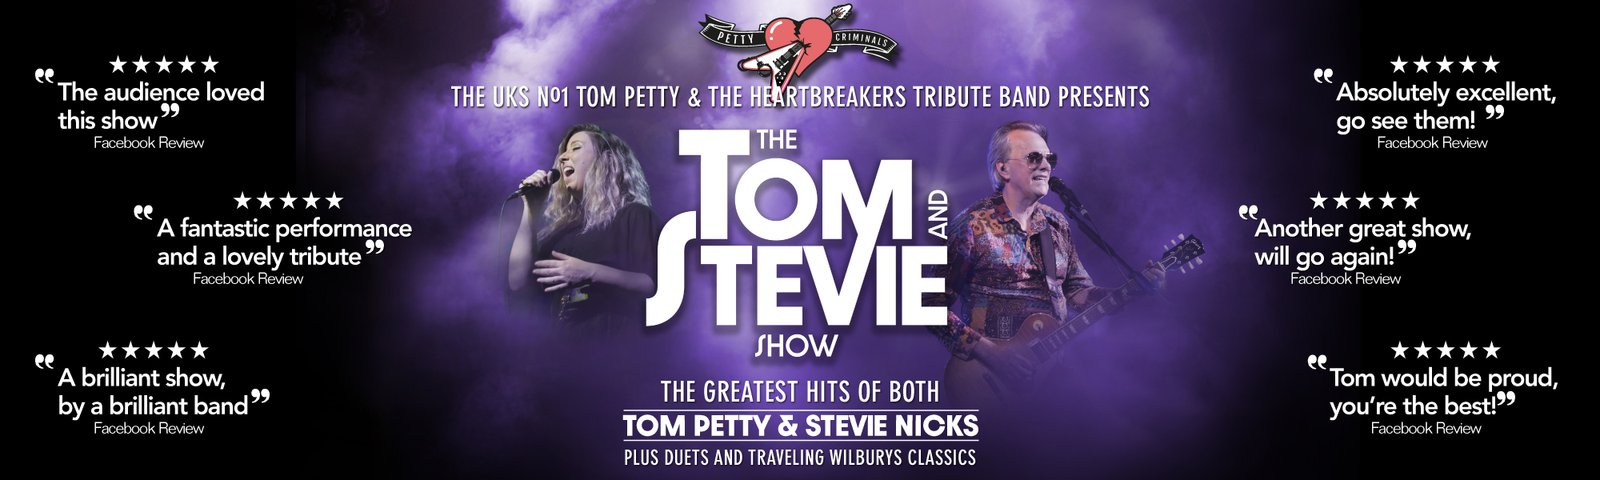 Tom and Stevie show 2000x600 banner image